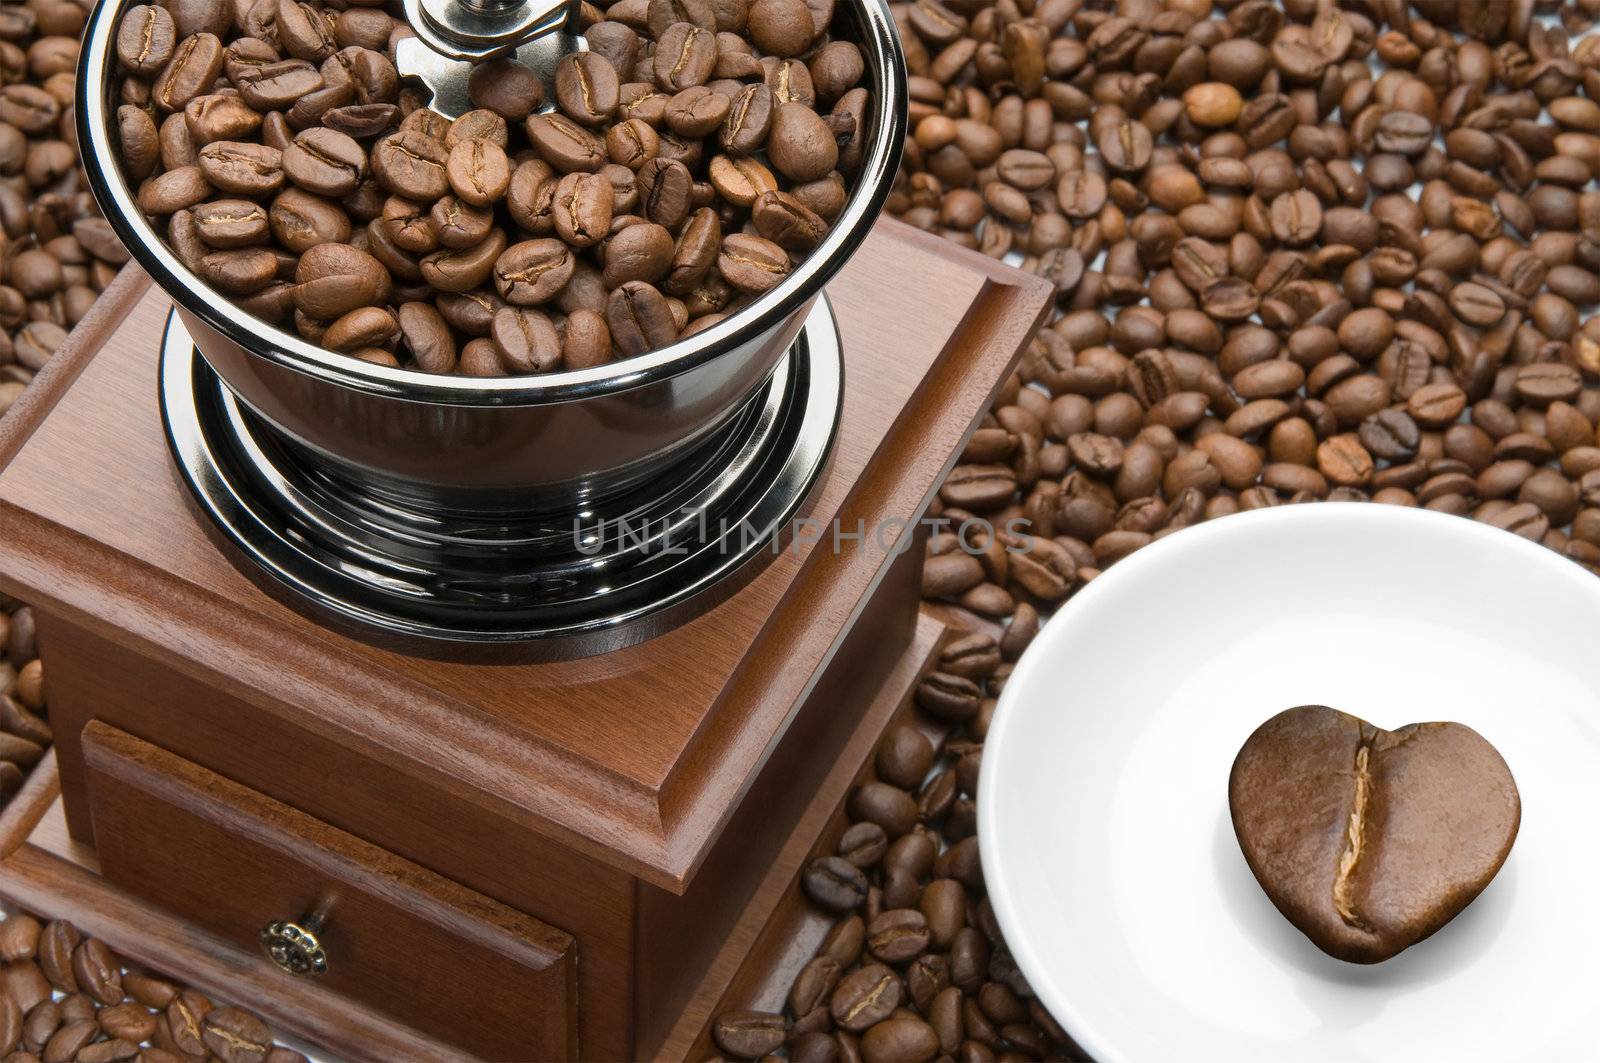 Old coffee grinder and heart on a saucer by zeffss